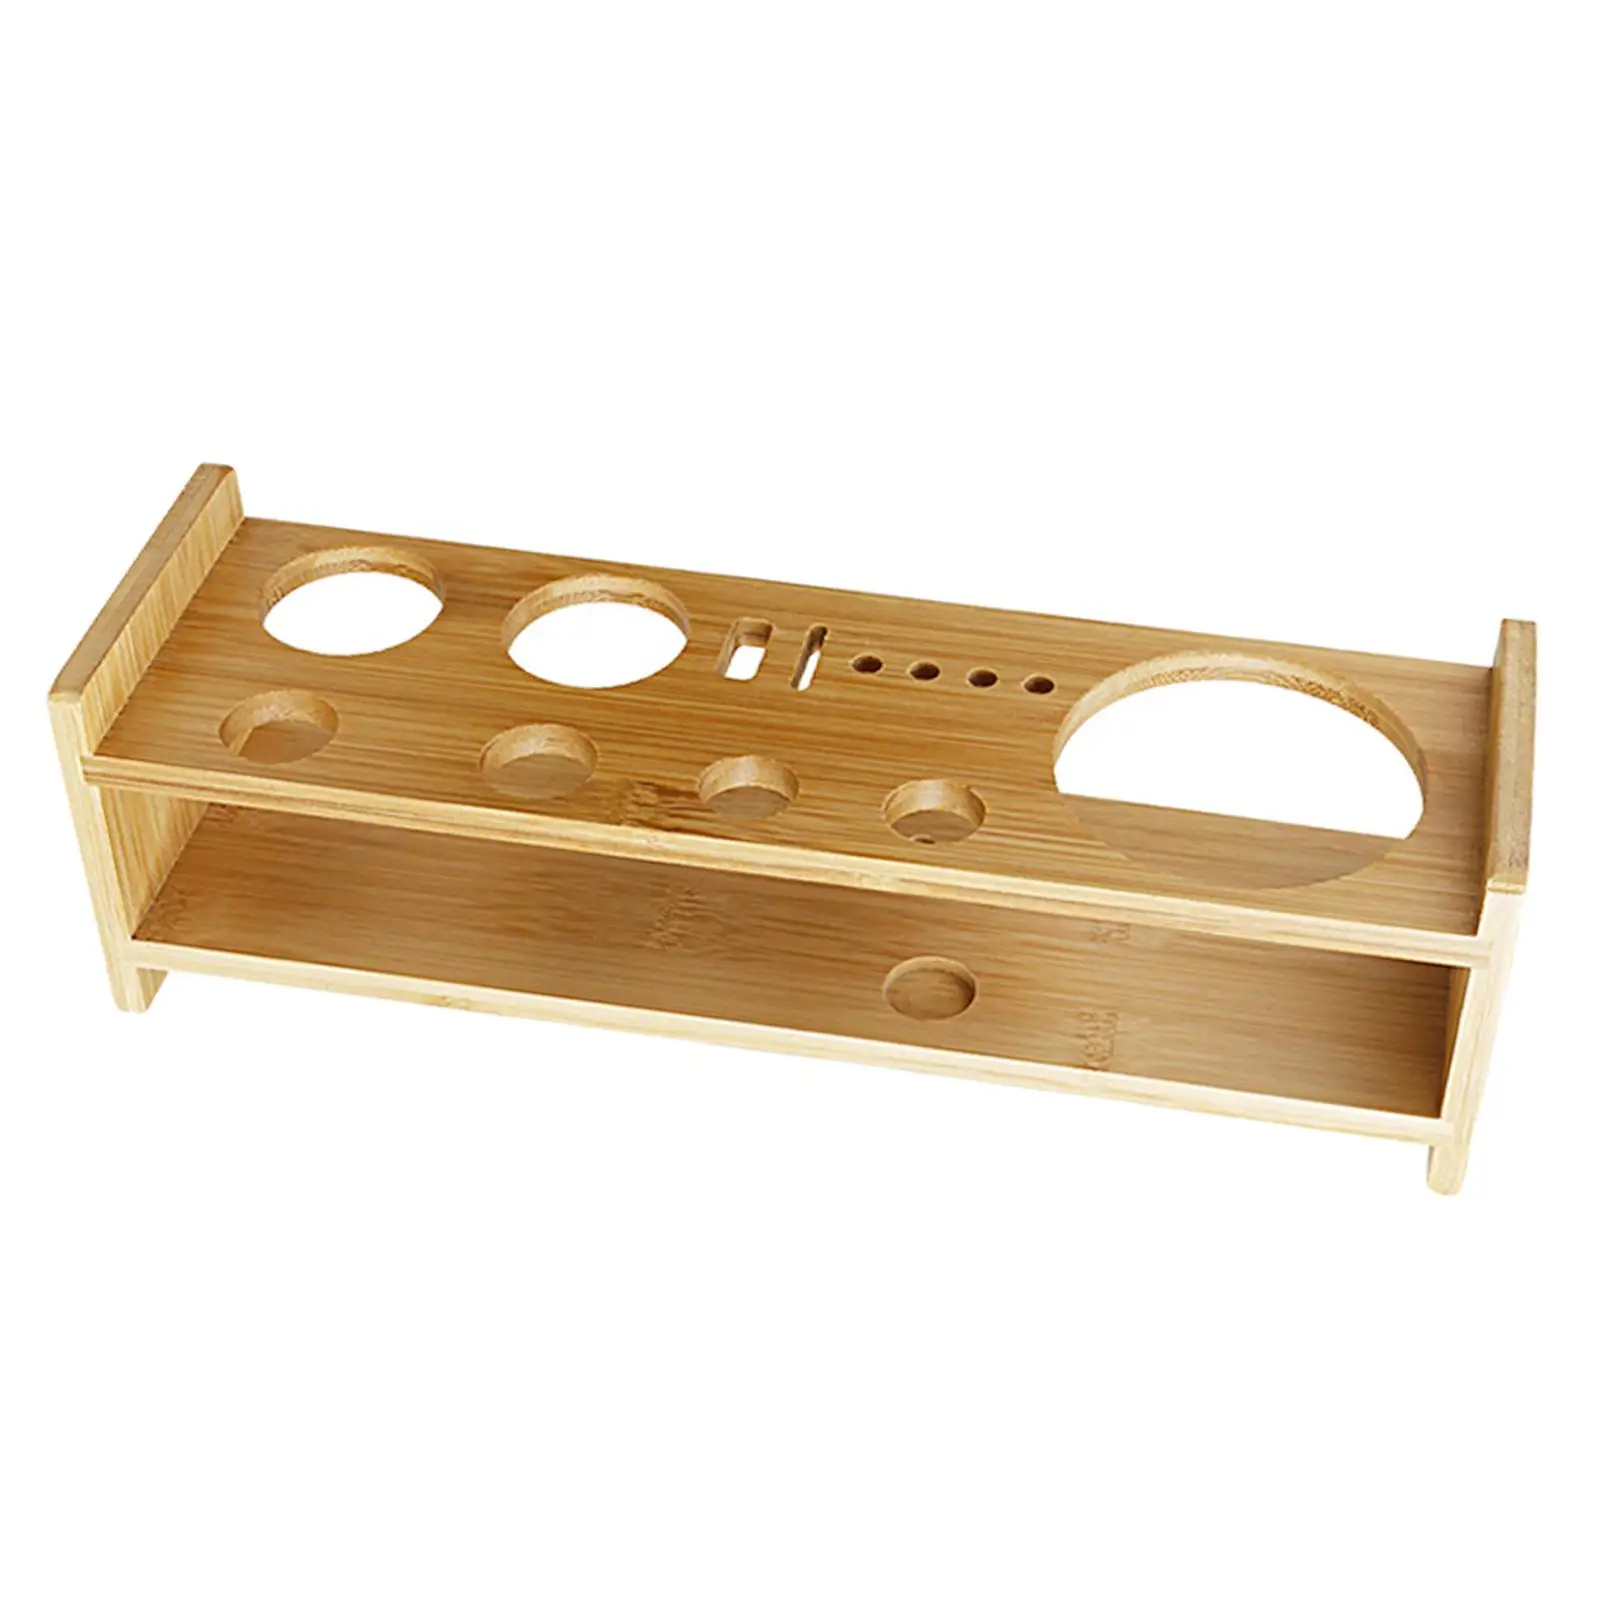 Cocktail Bartending Set Wooden Stand Multifunction Display Stand Barware Drinkware Set Cocktail Shaker Stand for Bar Home